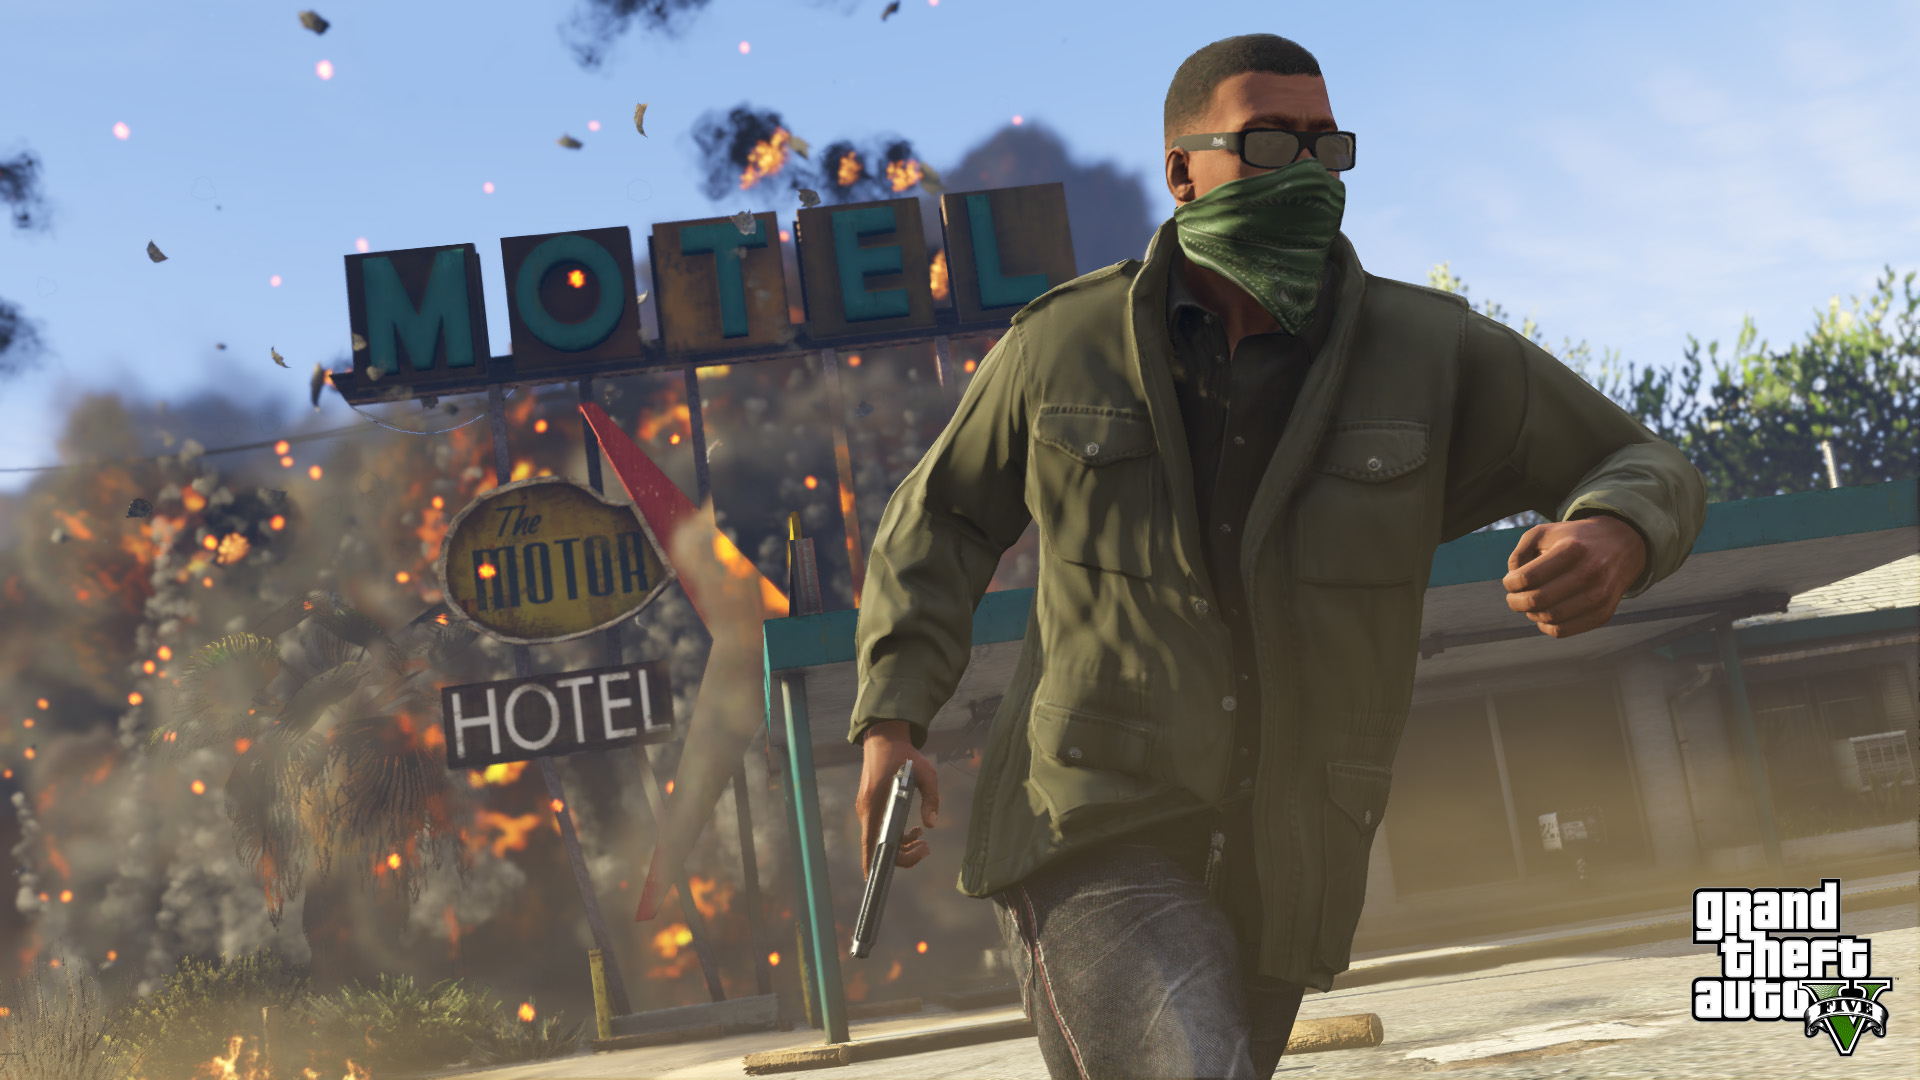 Grand Theft Auto V Reaches 90 Millions Copies Sold